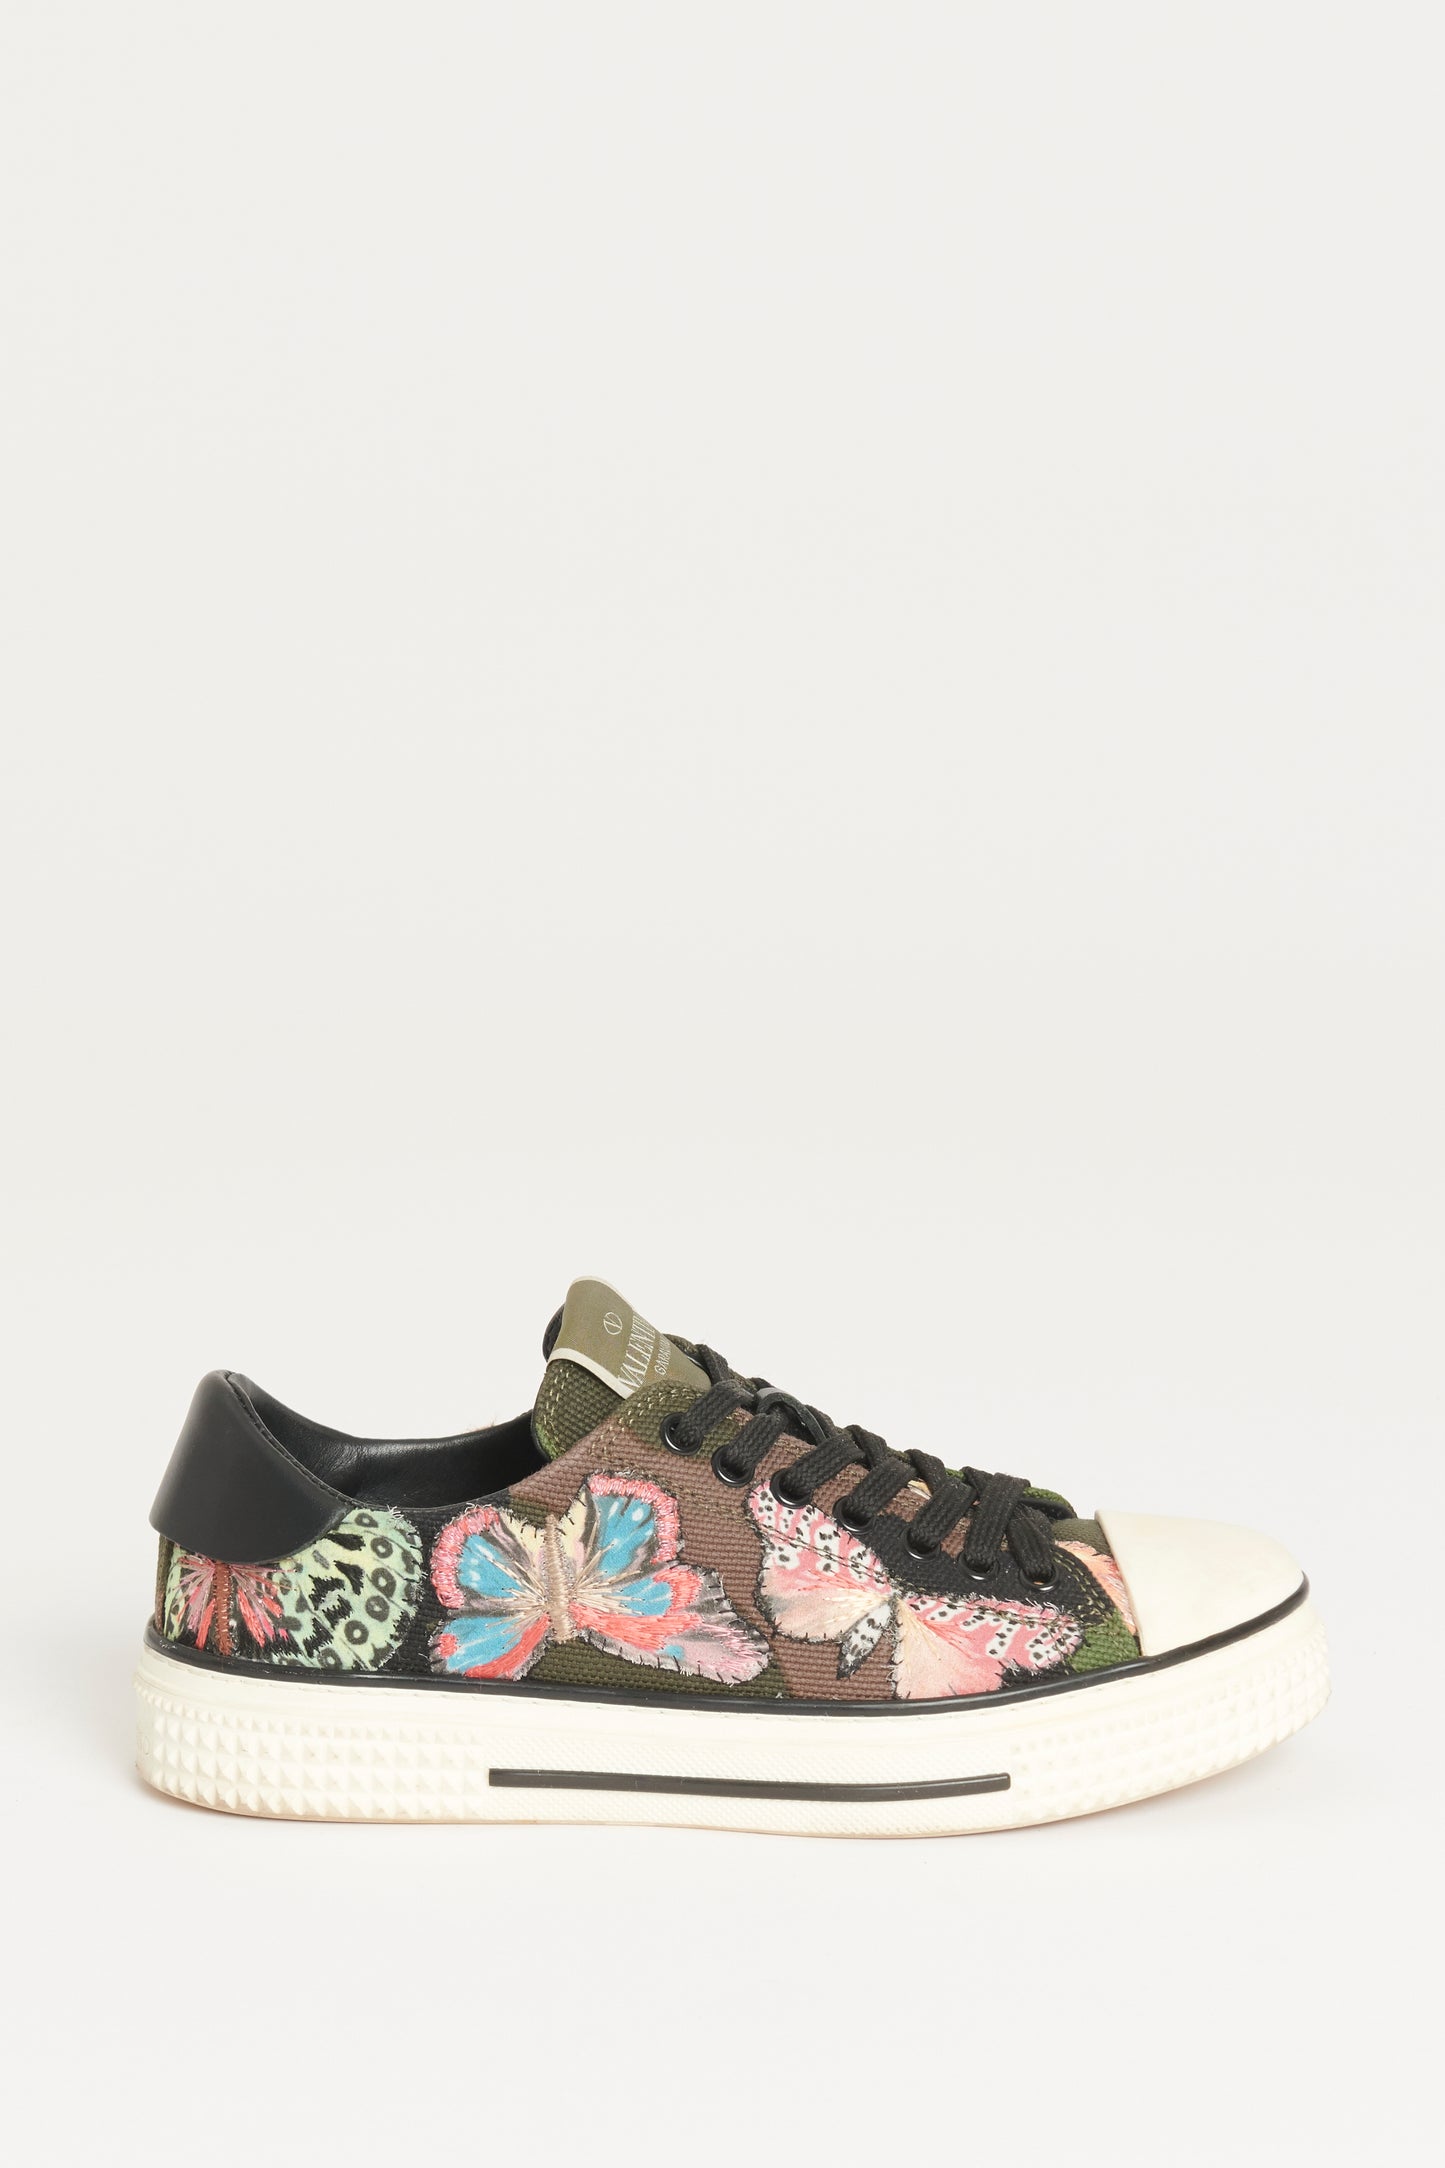 2016 Embroidered Canvas Preowned Camobutterfly Sneakers